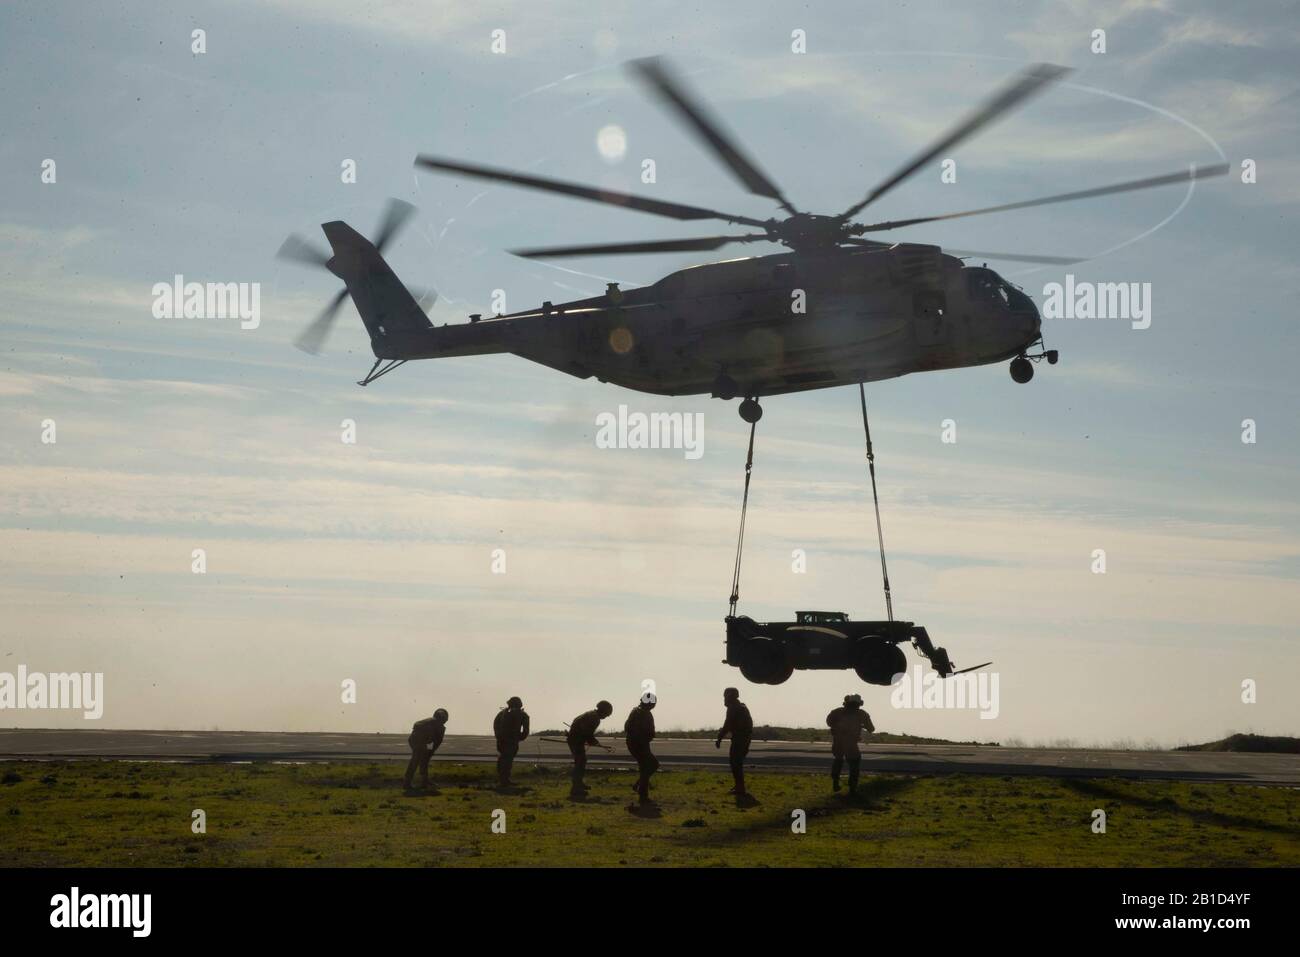 U.S. Marines with 1st Marine Logistics Group, 1st Transportation Support Battalion, Landing Support Company conduct an external lift testing the limits of the CH-53E Super Stallion, on Camp Pendleton, CA, January 15, 2019. Tipping the scales at around 28,000 lbs the Extended Boom Forklift provides Landing Support Company with a load that pushes the CH-53E near it’s external lift limits. (U.S. Marine Corps Photo by Sgt. Maximiliano Rosas) Stock Photo